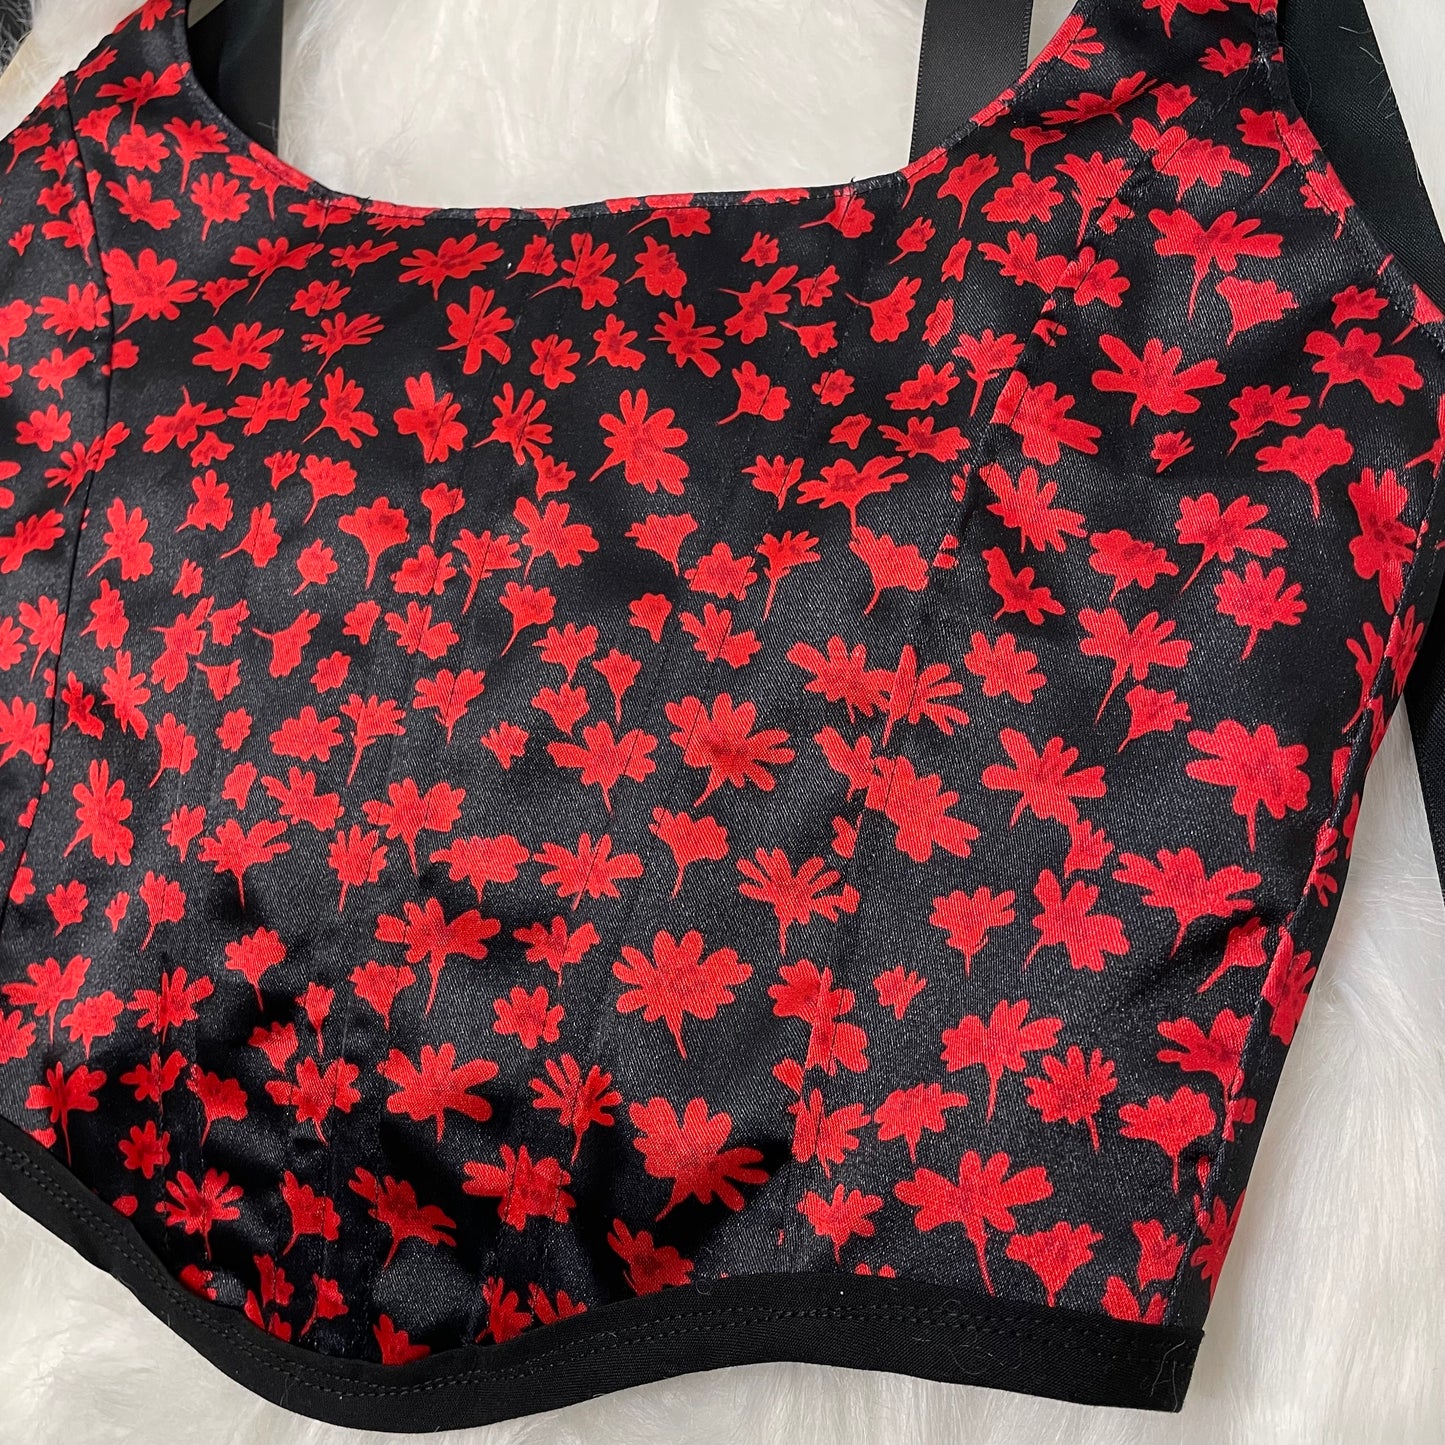 Handmade Red and Black Satin Corset Top